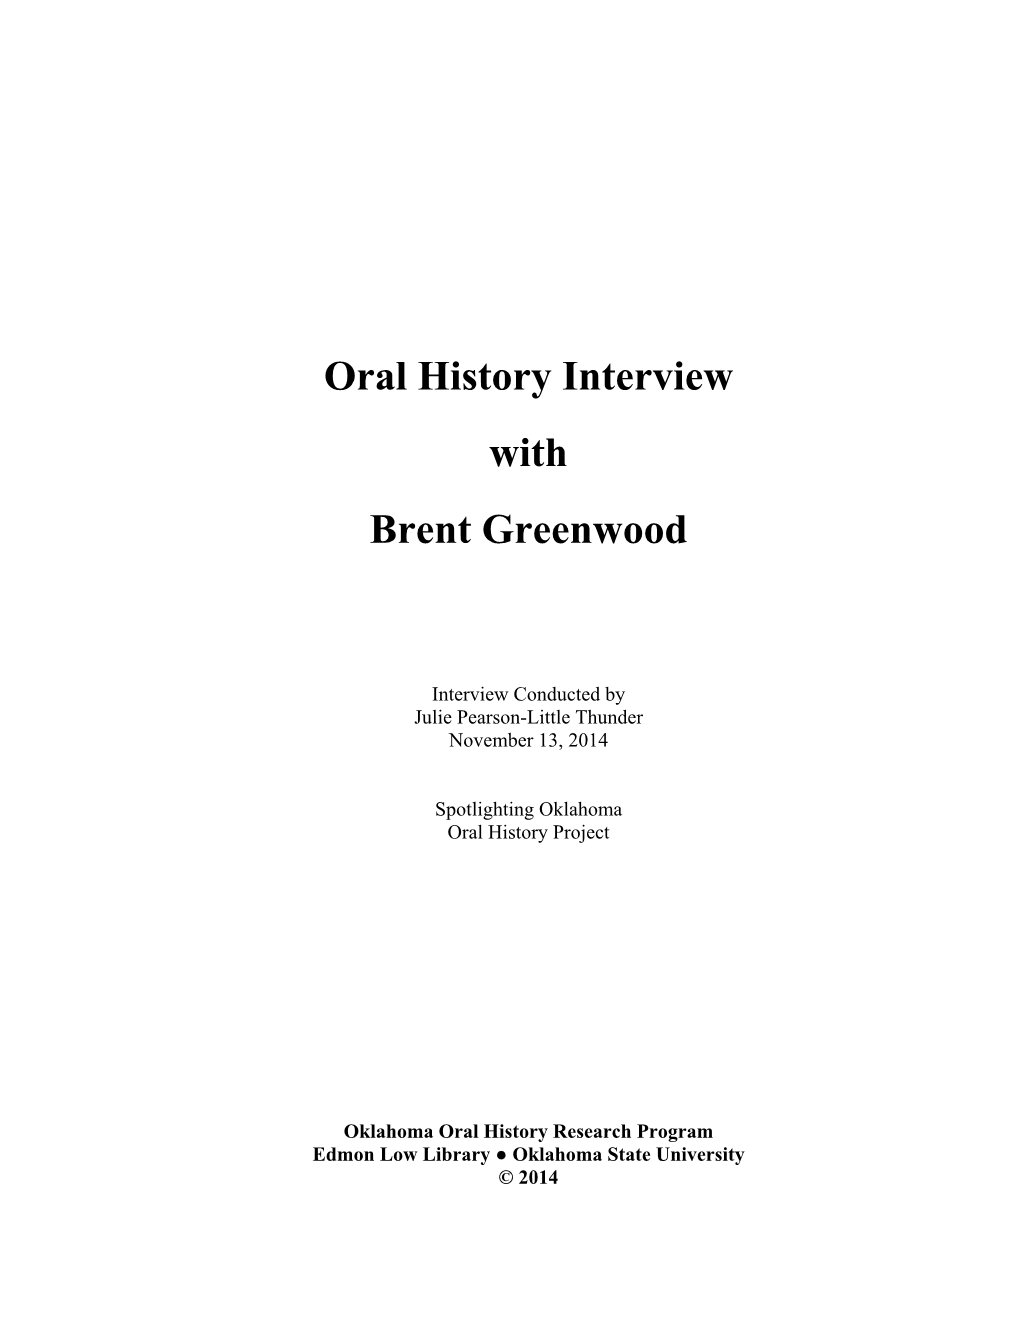 Oral History Interview with Brent Greenwood